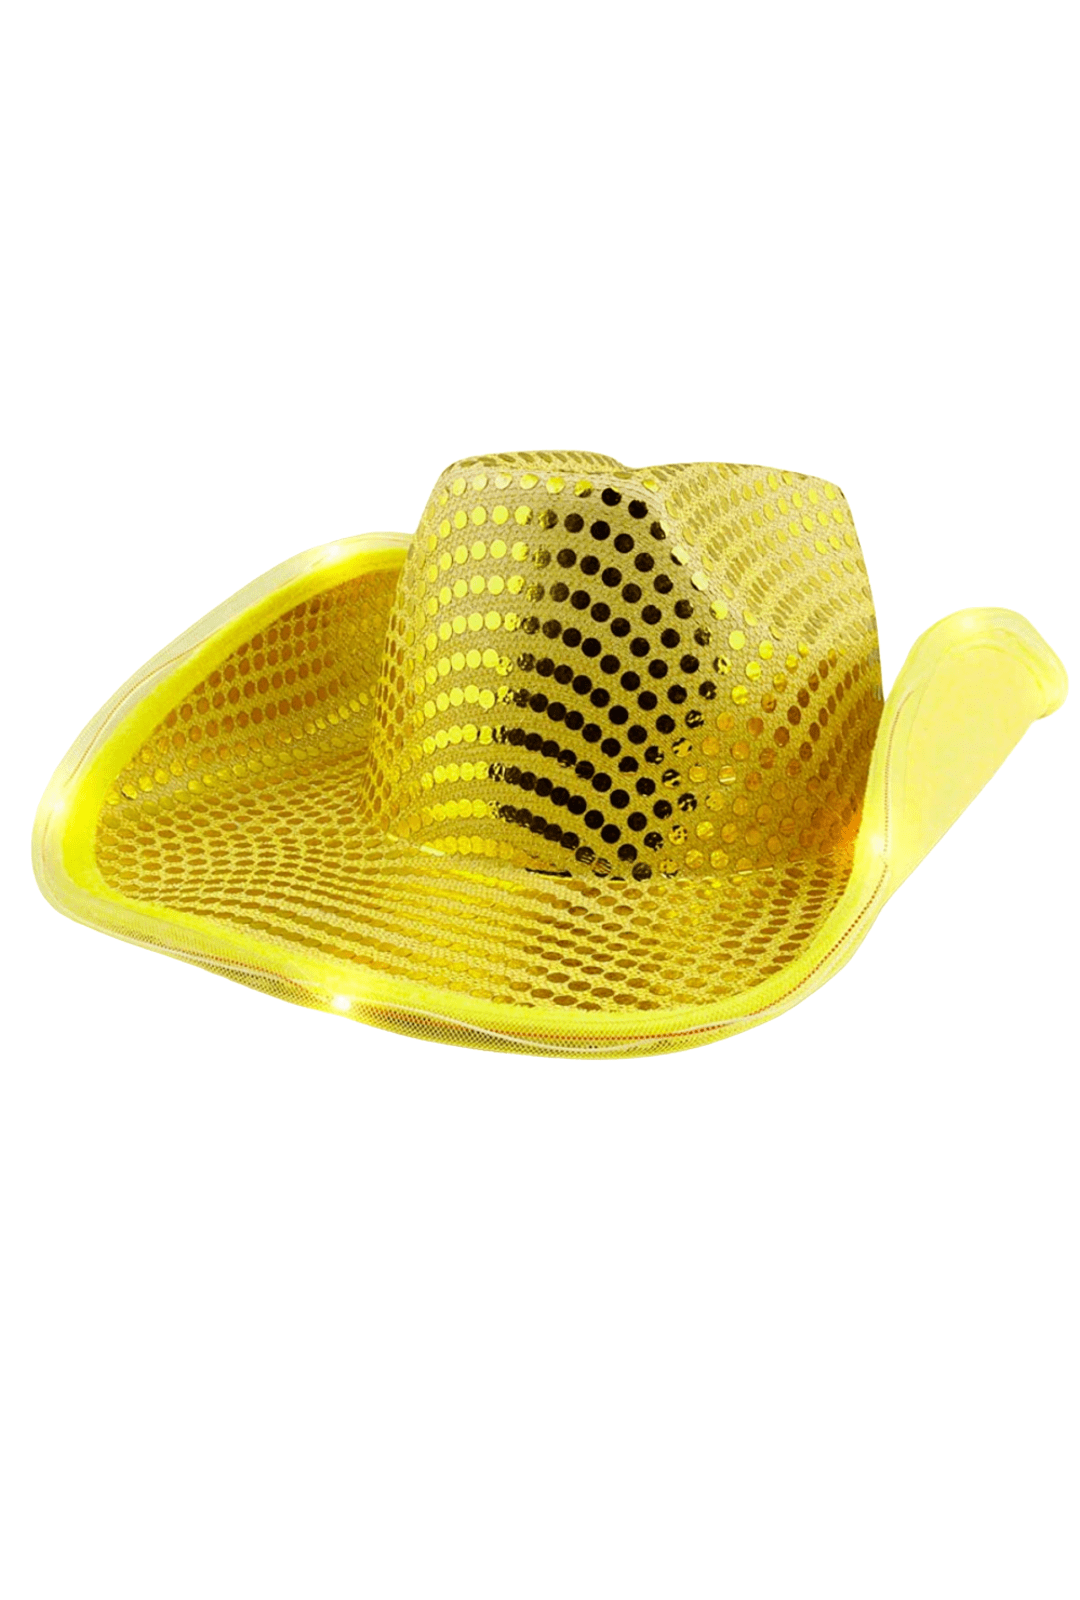 Yellow Sequin Light Up Cowboy Hat